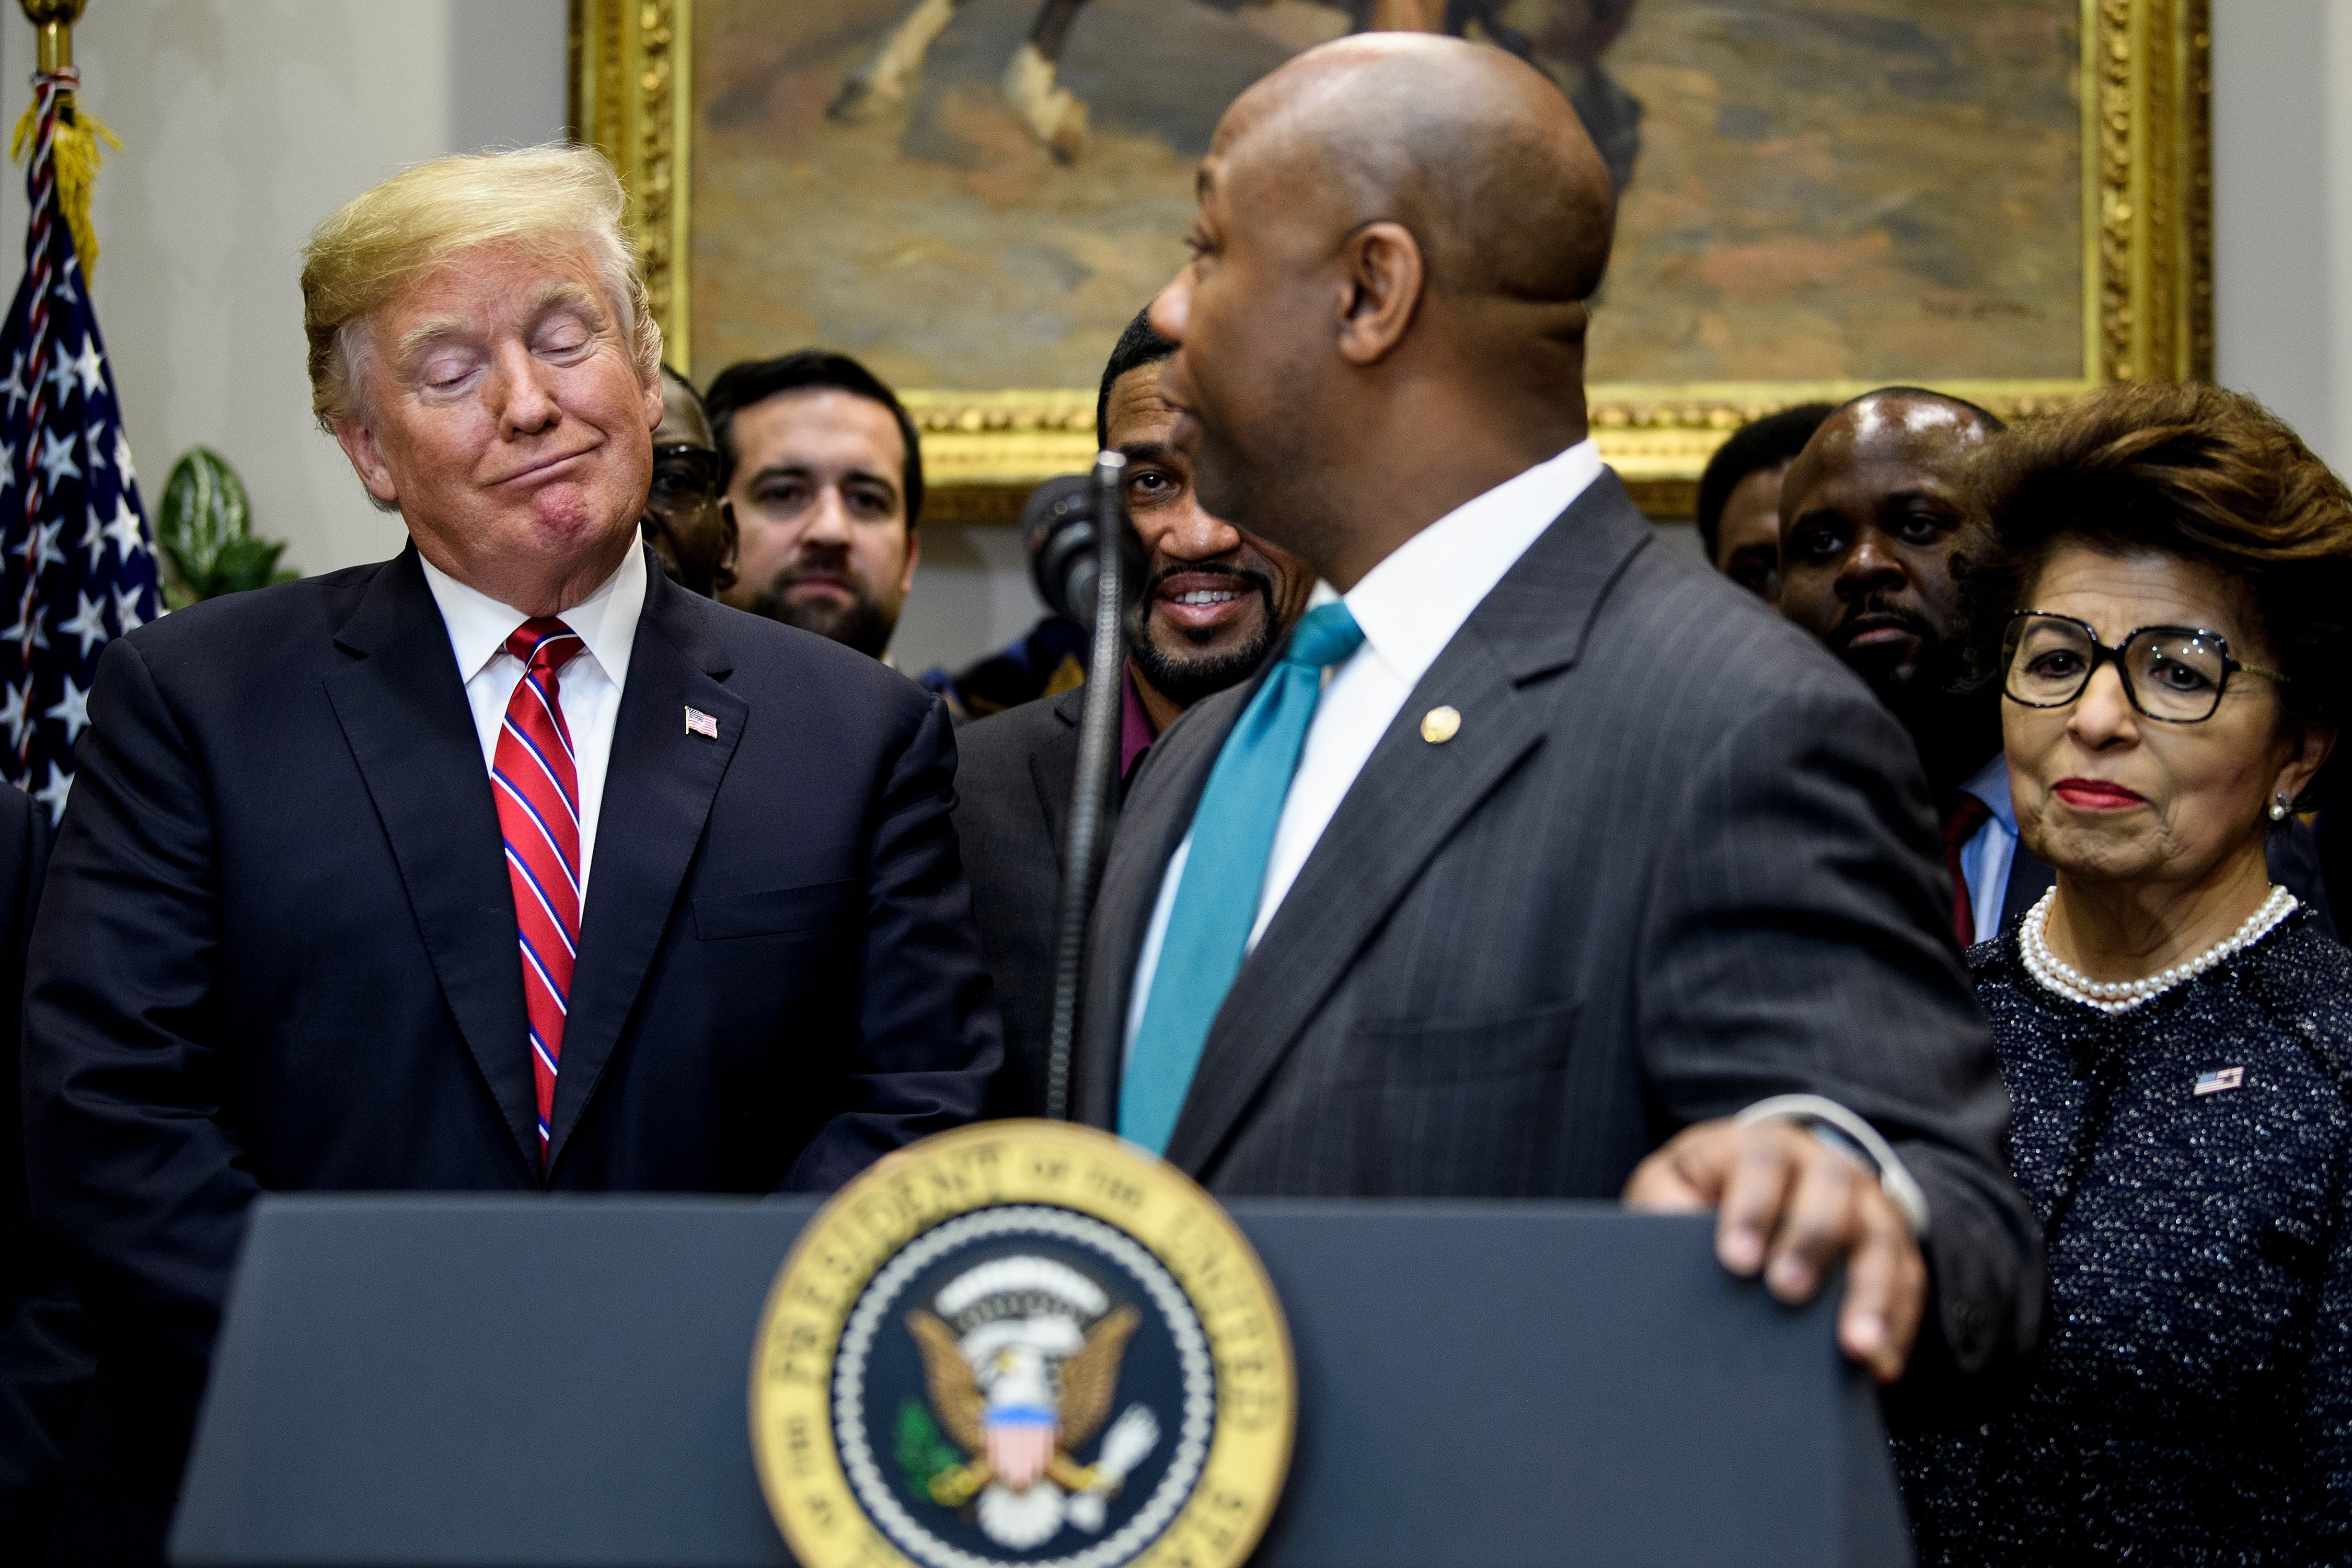 US President Donald Trump (L), US Treasurer Jovita Carranza (R), and others listen while US Senator Tim Scott speaks during an executive order signing event for the "White House Opportunity and Revitalization Council " in the Roosevelt Room of the White House December 12, 2018 in Washington, DC. (BRENDAN SMIALOWSKI/AFP/Getty Images)